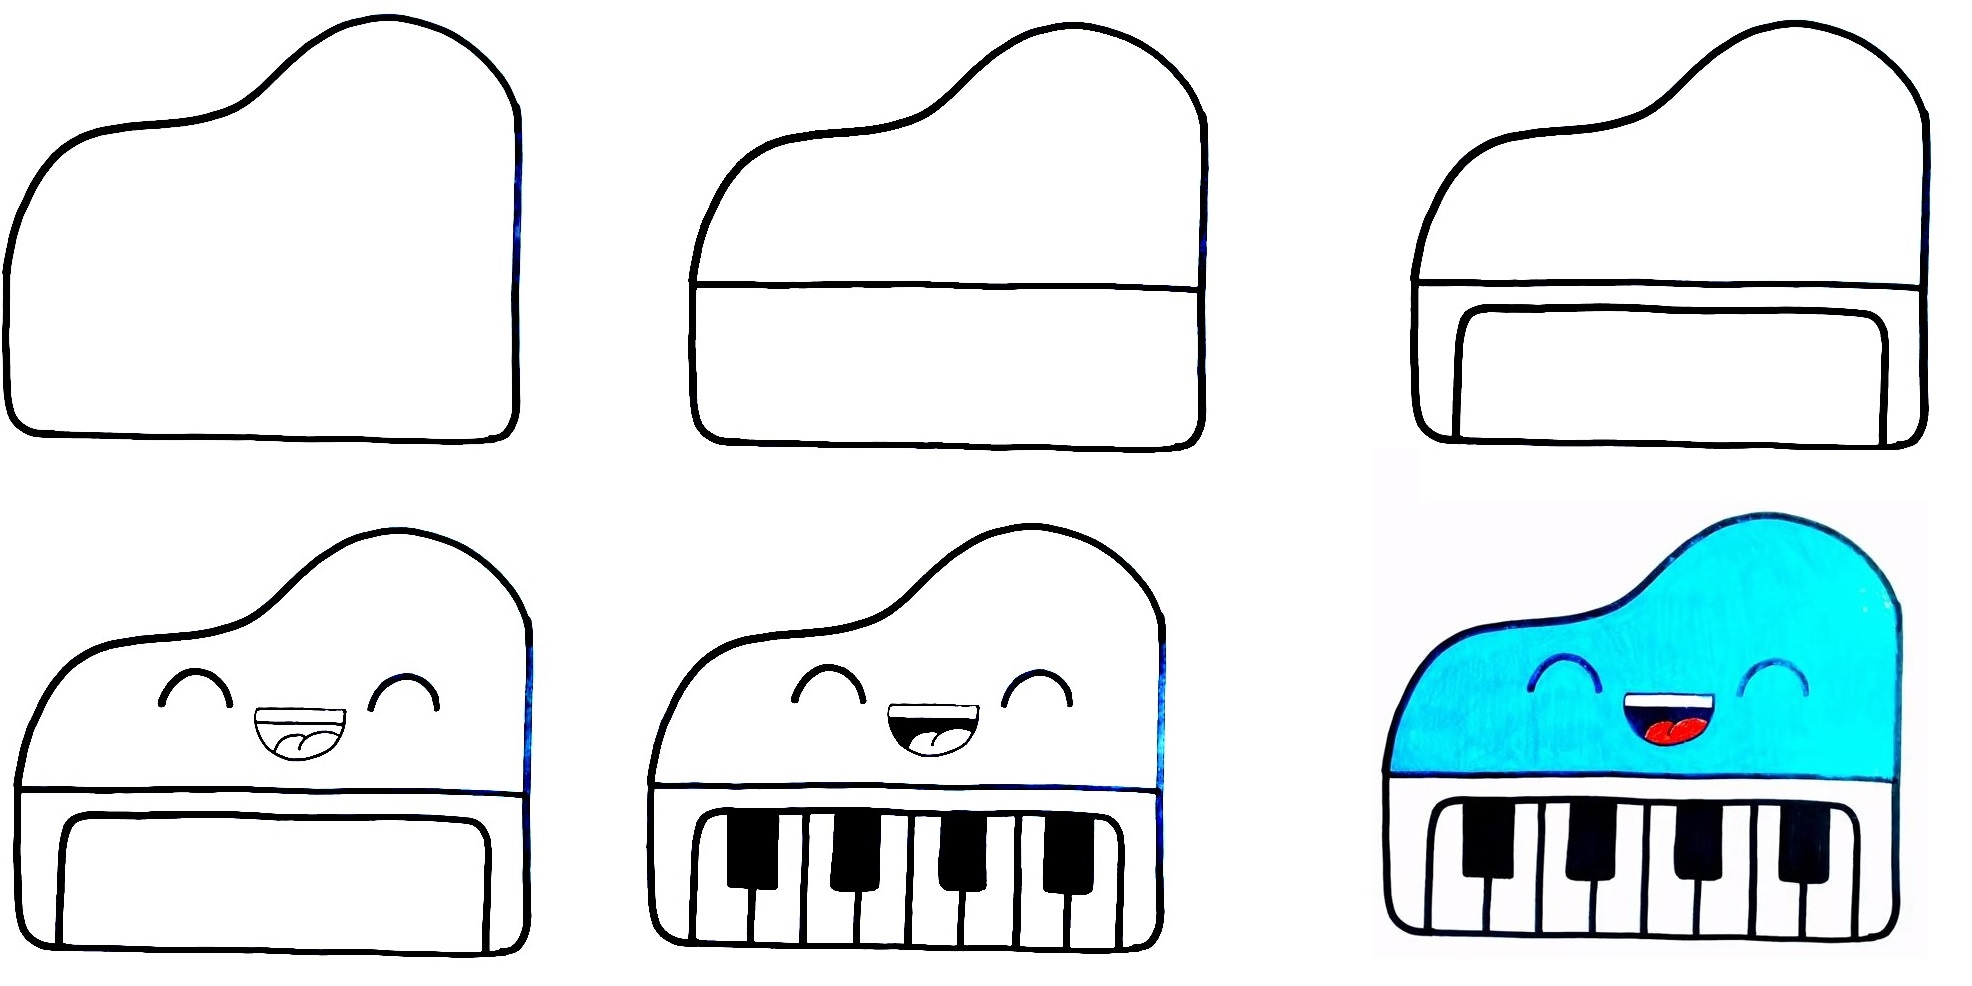 how to draw piano